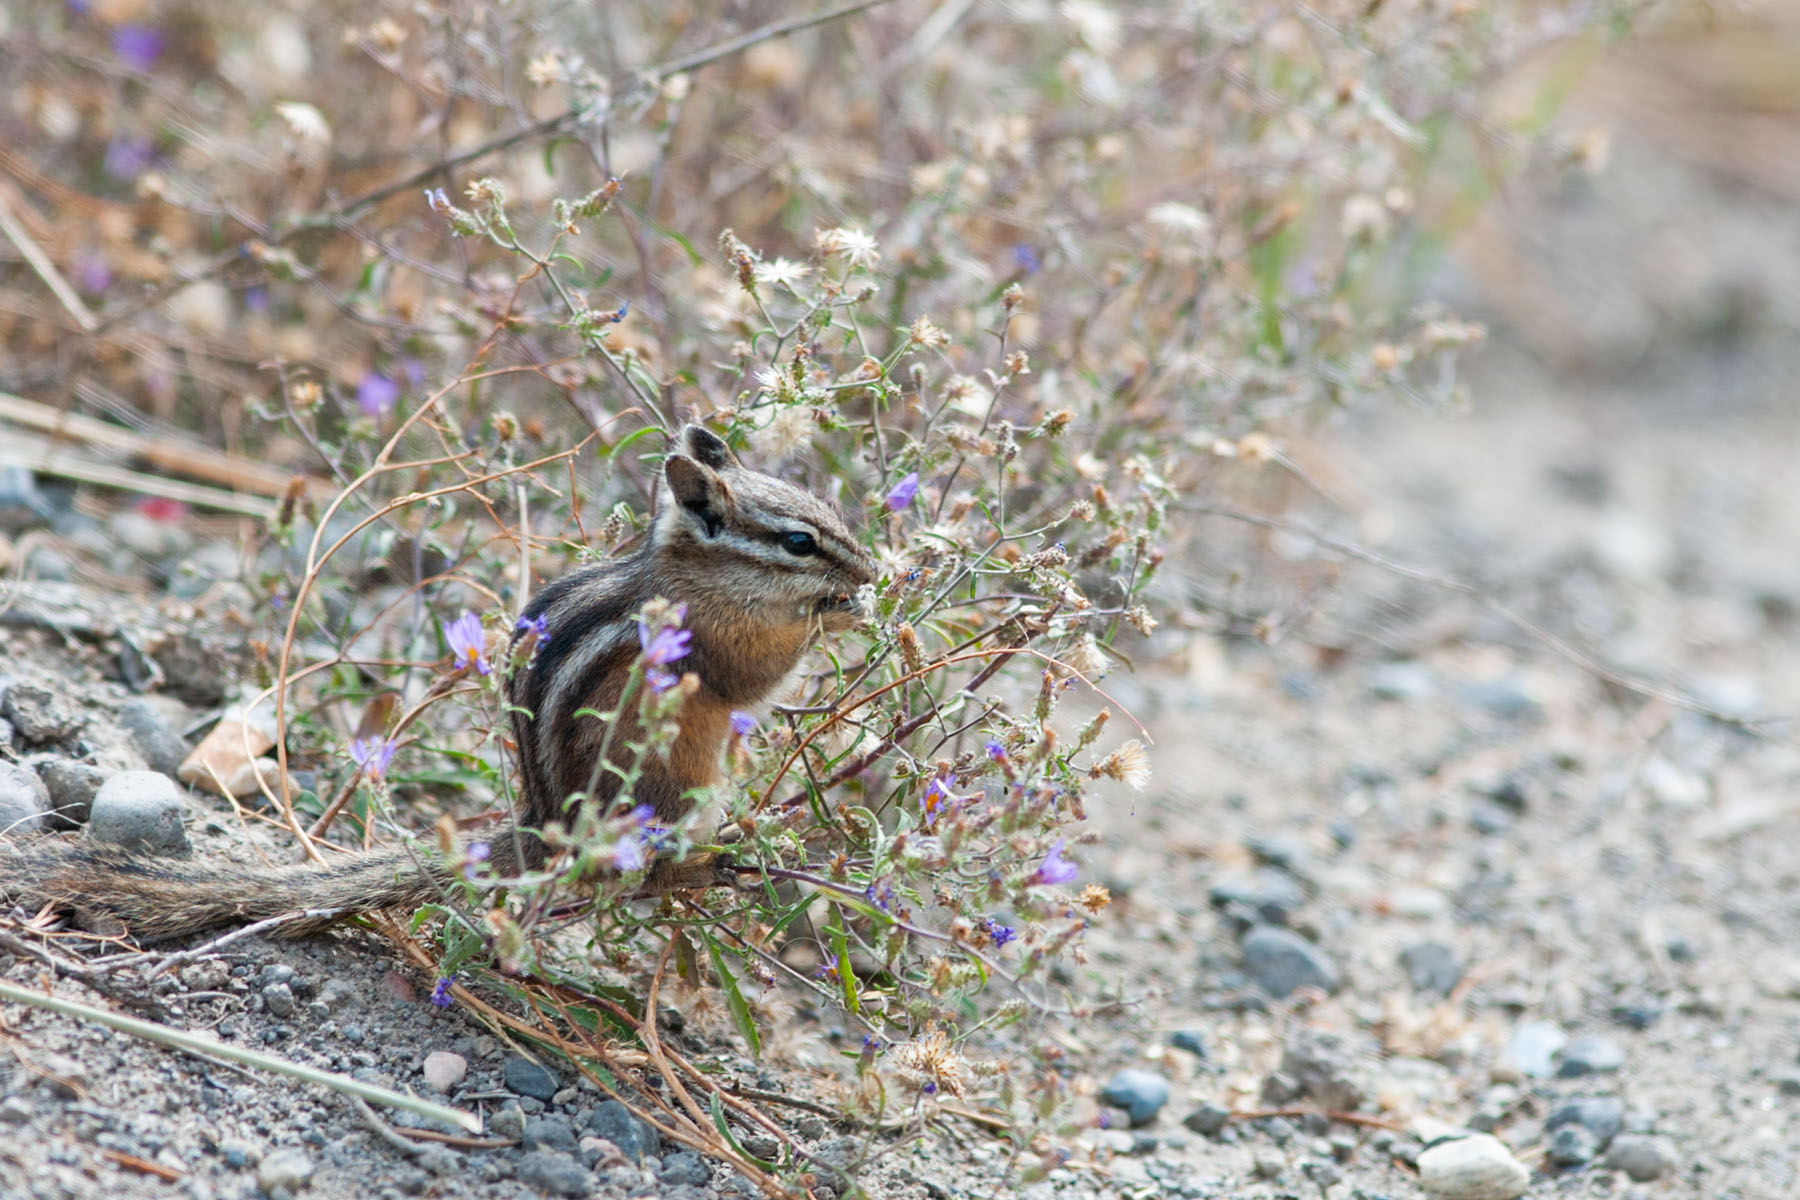 A ground squirrel gets a snack.  Click for next photo.